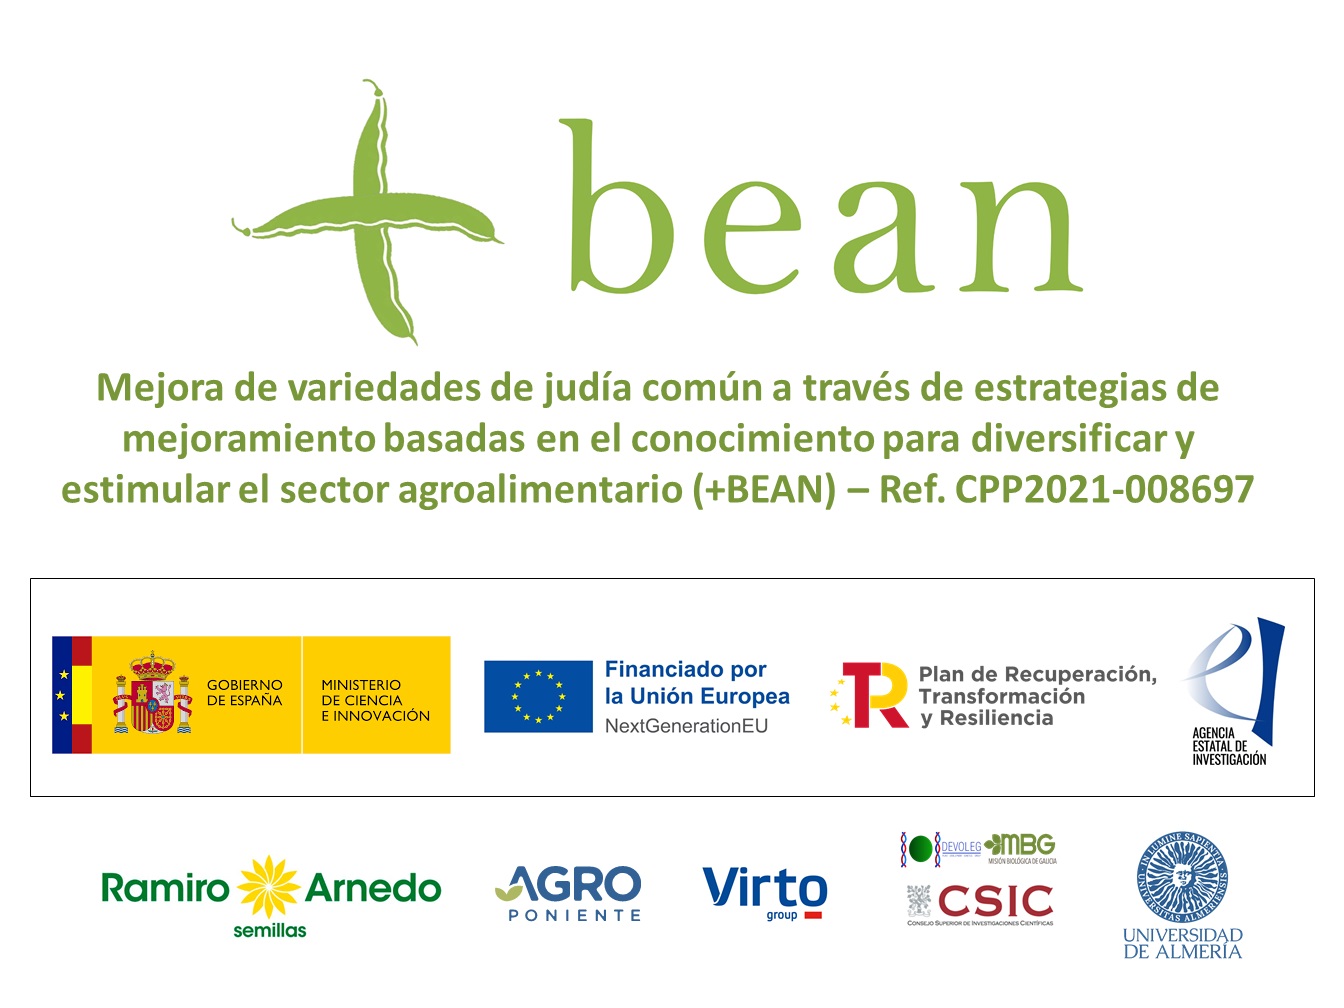 +BEAN · IMPROVING COMMON BEAN VARIETIES THROUGH KNOWLEGDE-DRIVEN BREEDING STRATEGIES TO DIVERSIFY AND ENCOURAGE THE AGRI-FOOD SECTOR